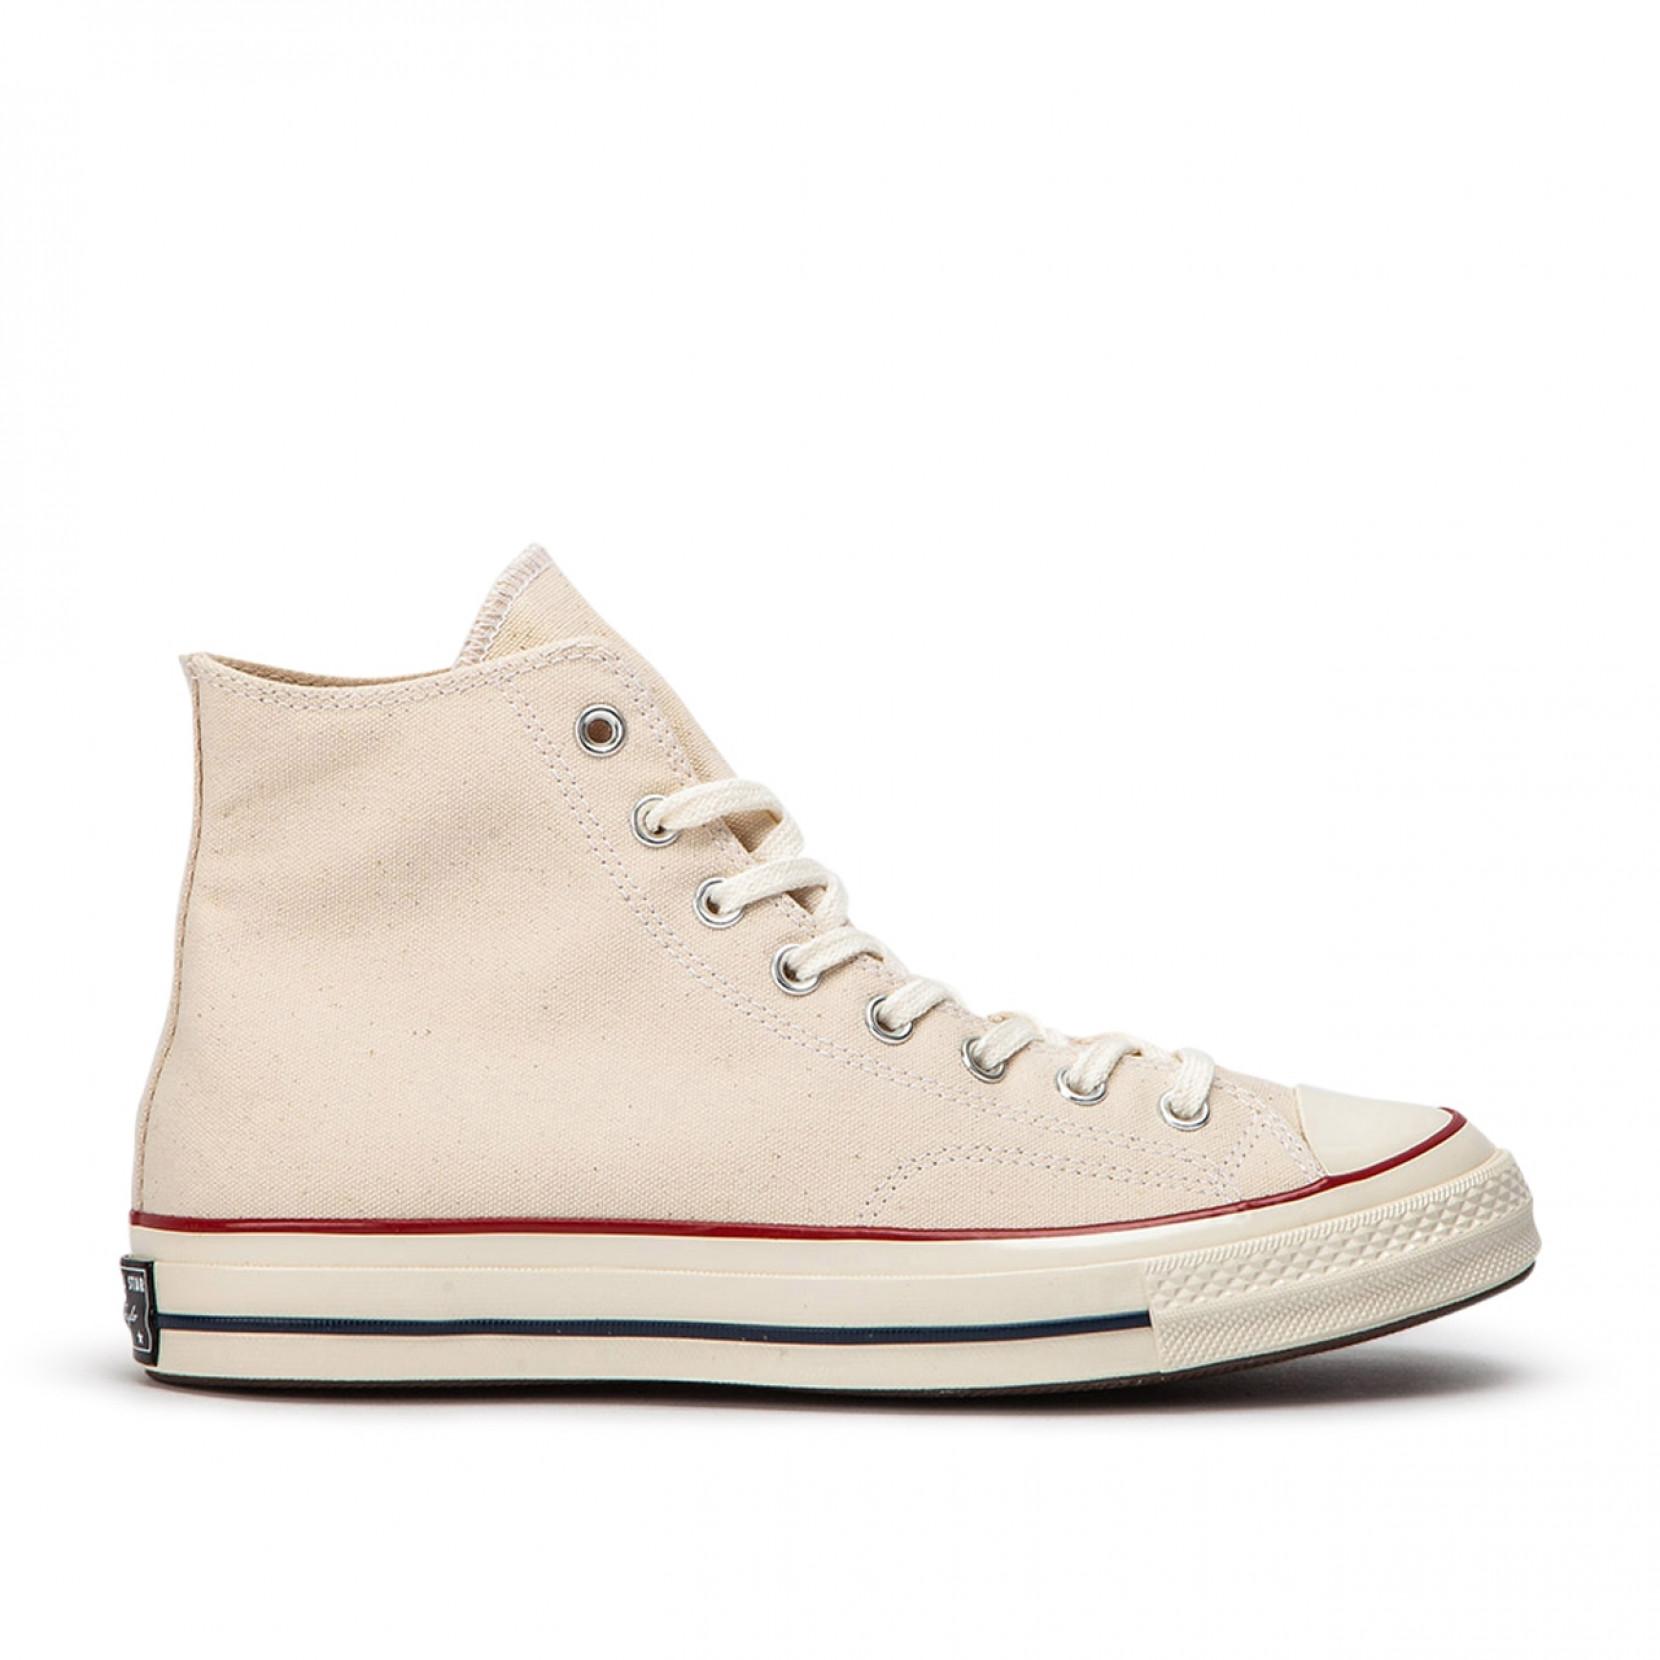 Converse Canvas Chuck Taylor 70 Hi in Beige (Natural) for Men - Lyst